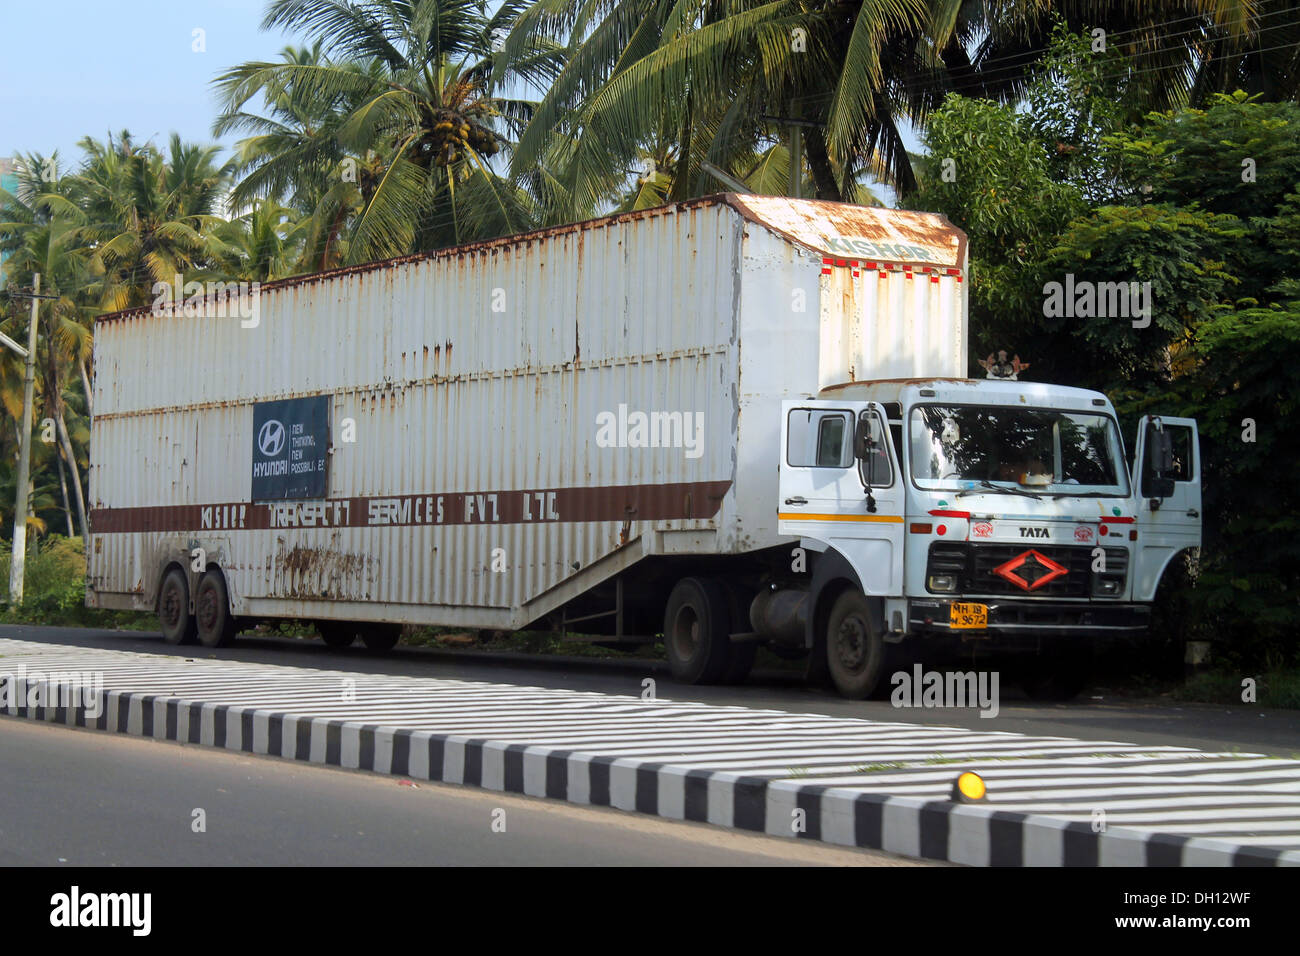 Truck for carrying Hyundai cars to showroom parked at the roadside in Kerala Stock Photo